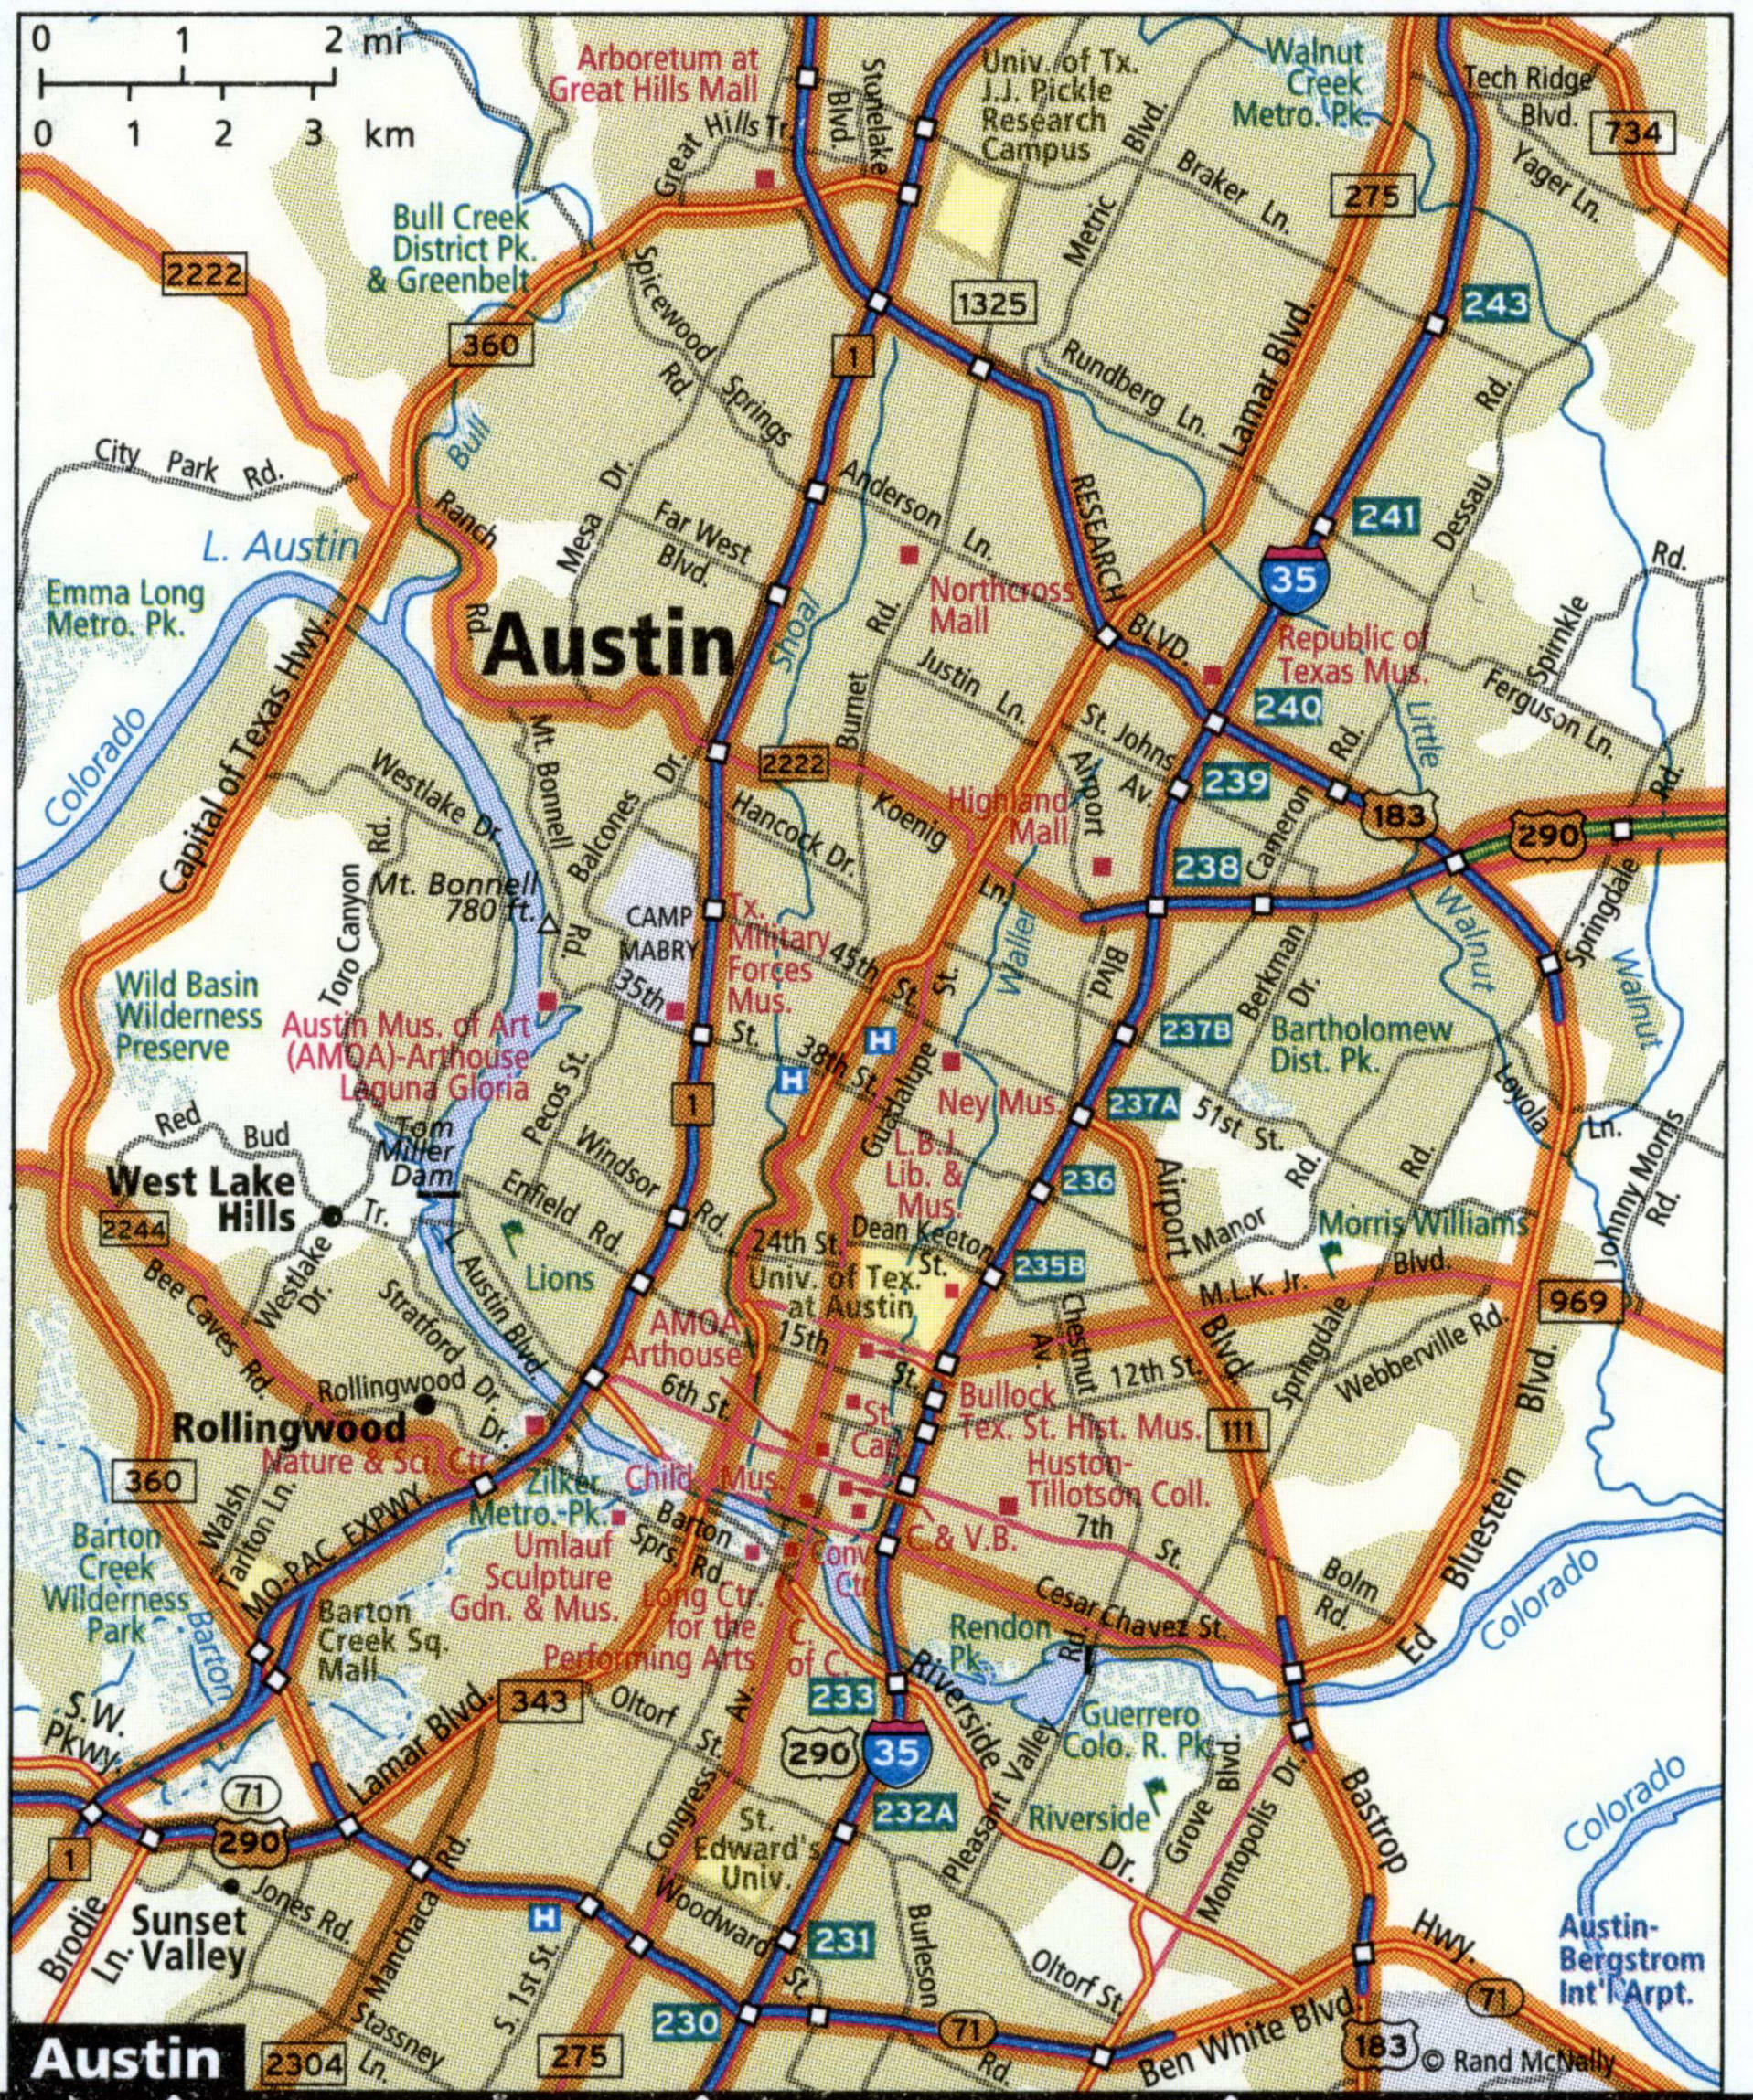 Austin city map for truckers